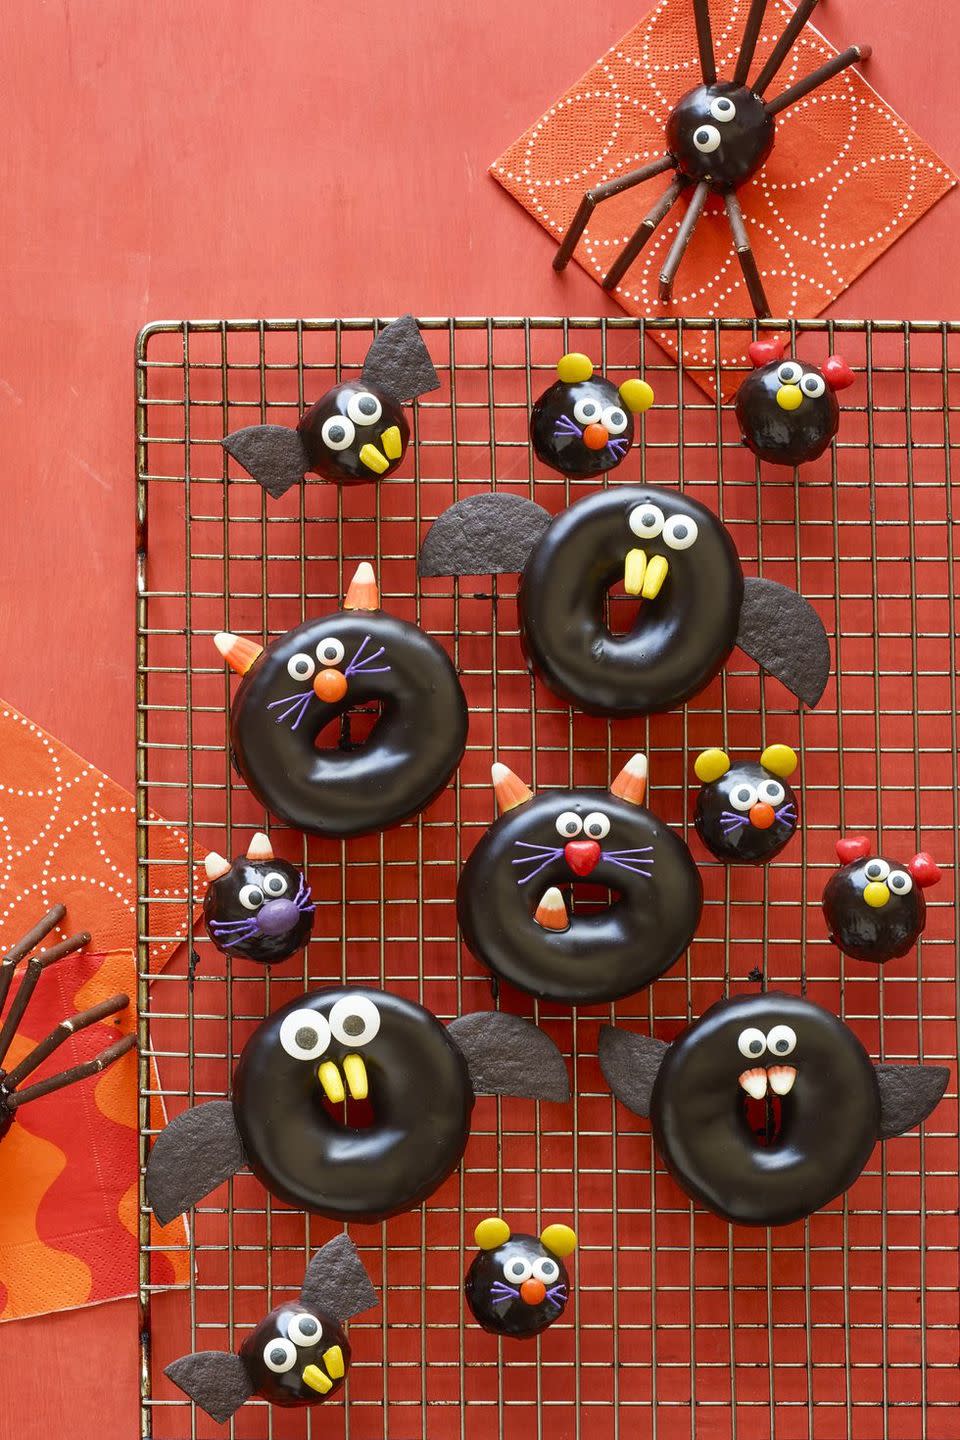 <p>Kids will swarm around this chocolate-dipped dessert that's frightfully cute.<br></p><p>Get the <strong><a href="https://www.womansday.com/food-recipes/food-drinks/a23460042/black-cat-bat-spider-and-mice-doughnuts-recipe/" rel="nofollow noopener" target="_blank" data-ylk="slk:Black Cat, Bat, Spider, and Mice Doughnut recipe" class="link ">Black Cat, Bat, Spider, and Mice Doughnut recipe</a></strong><strong>.</strong><em><strong><br></strong></em></p>